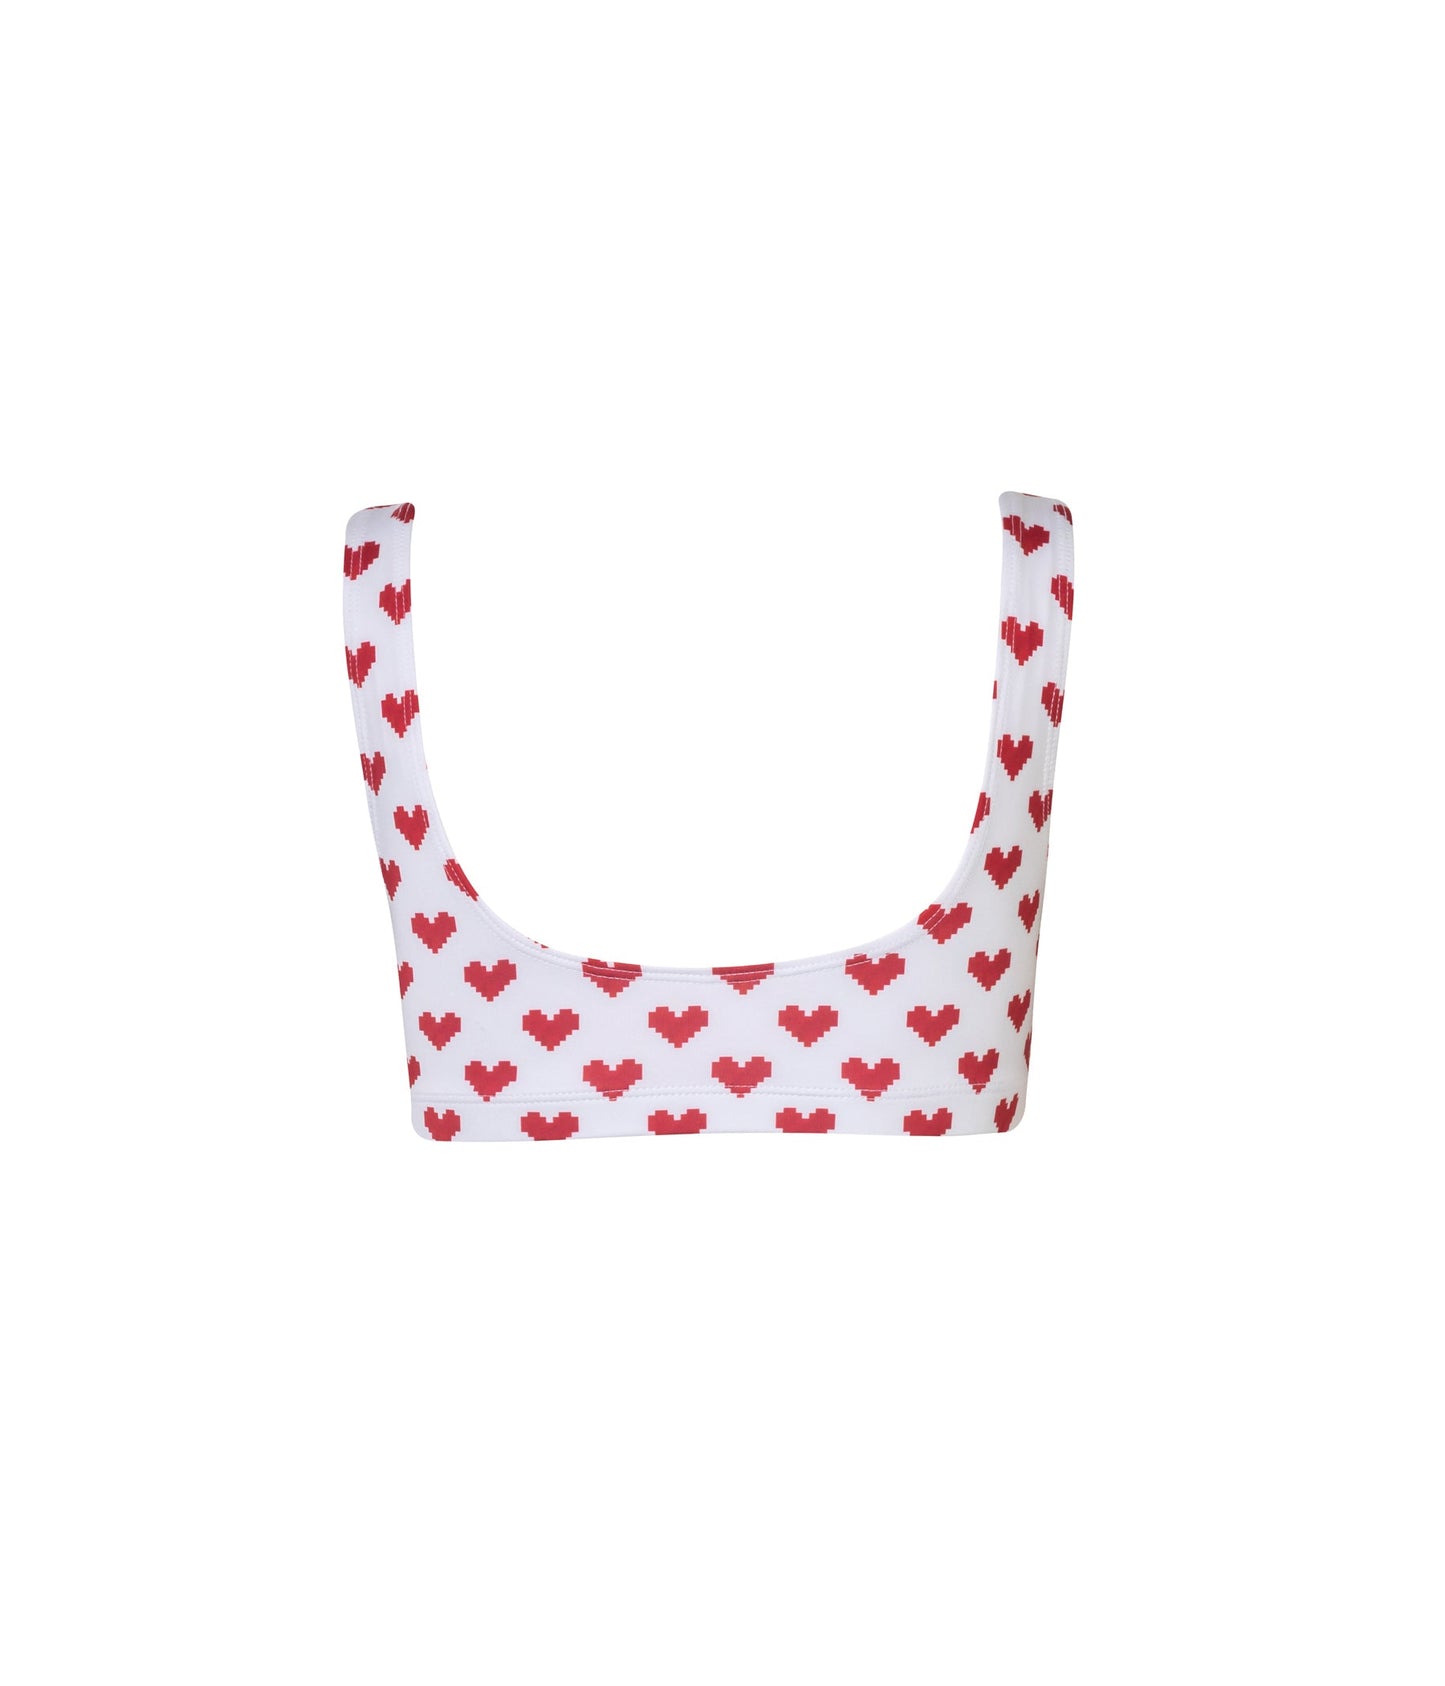 Verdelimon - Top - Amy- Dreamland - Red Pixel Hearts - Back